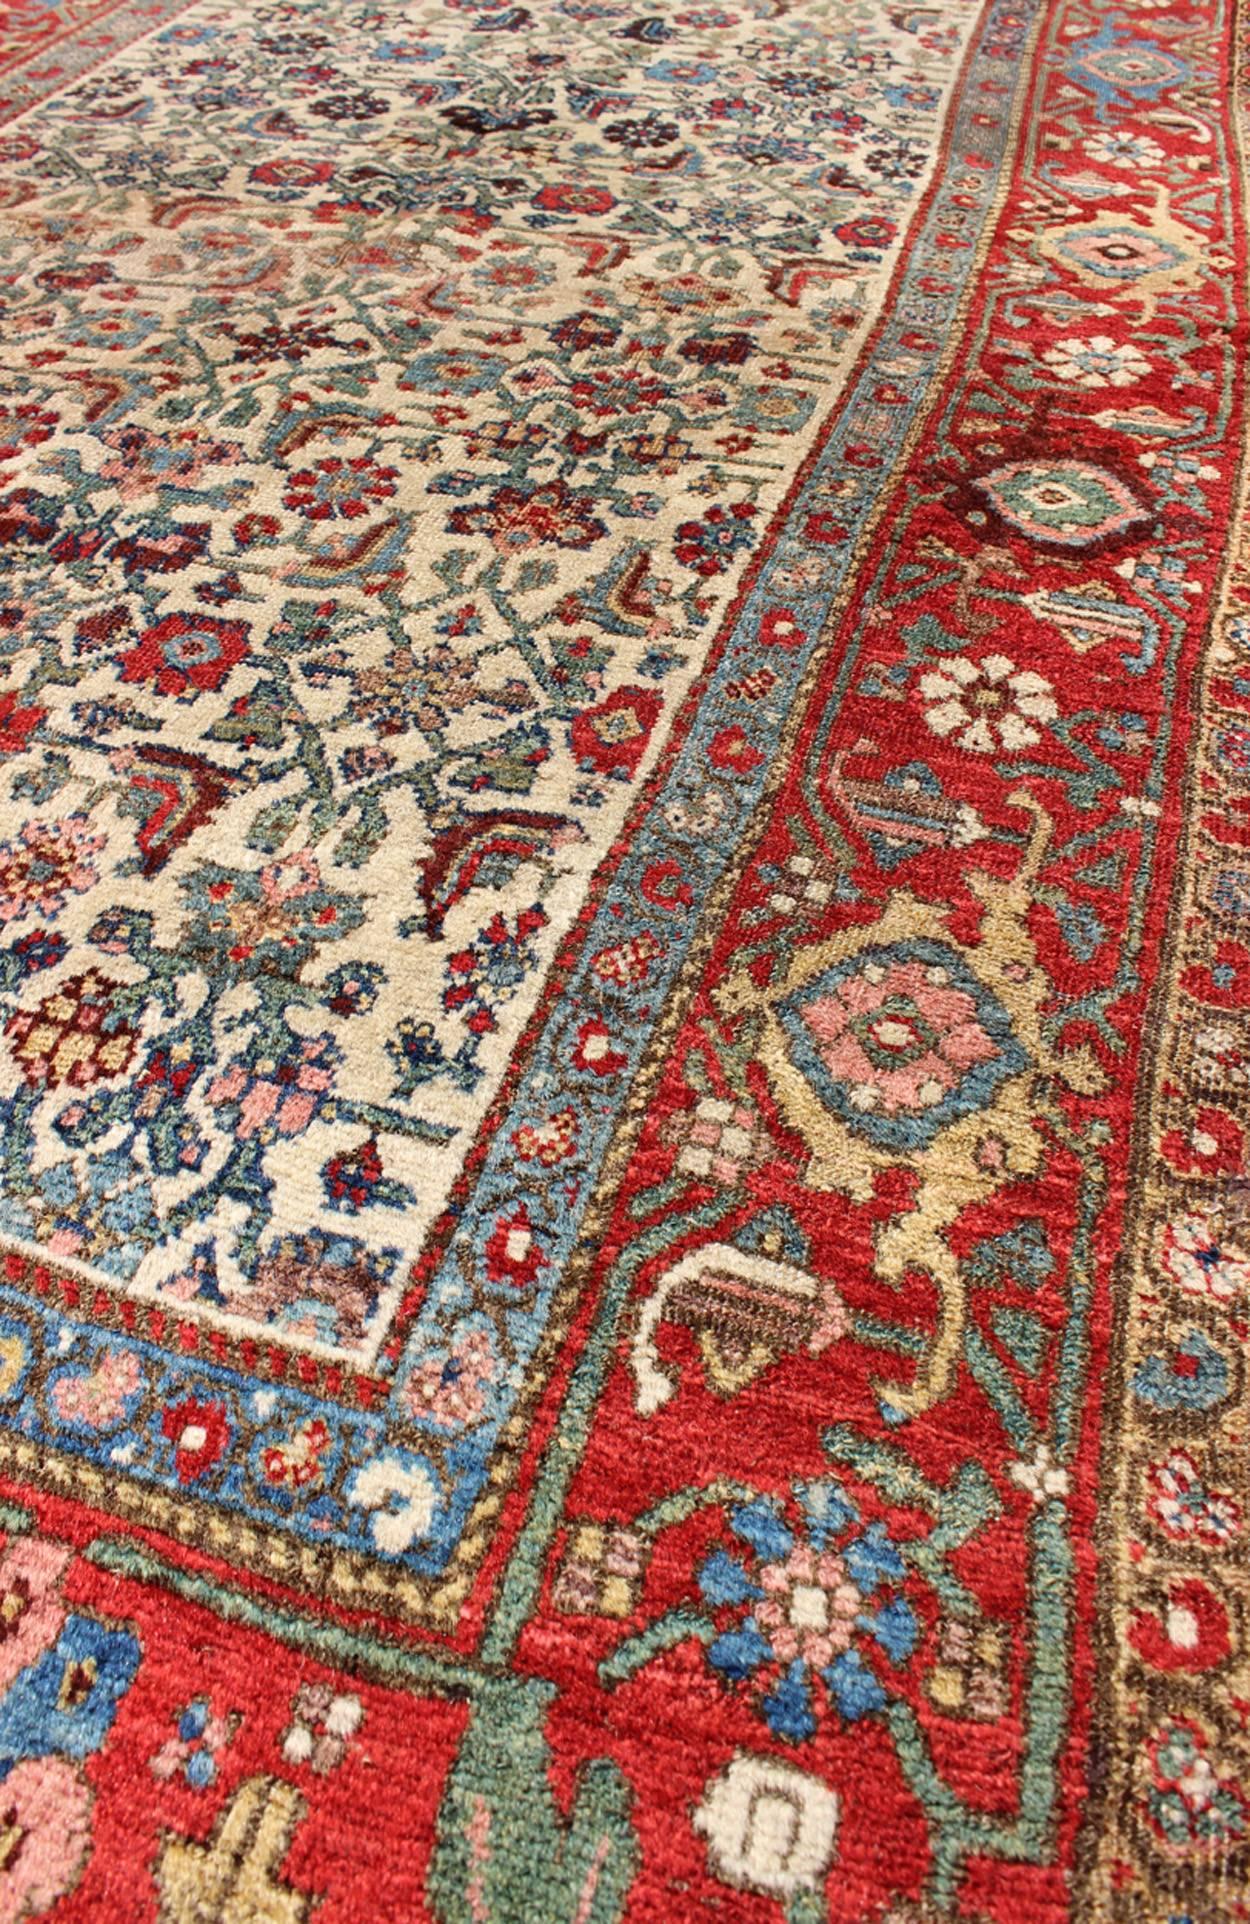 Antique Persian Bidjar Carpet with Ivory, Rose, Green, Blue and Aubergine In Good Condition For Sale In Atlanta, GA